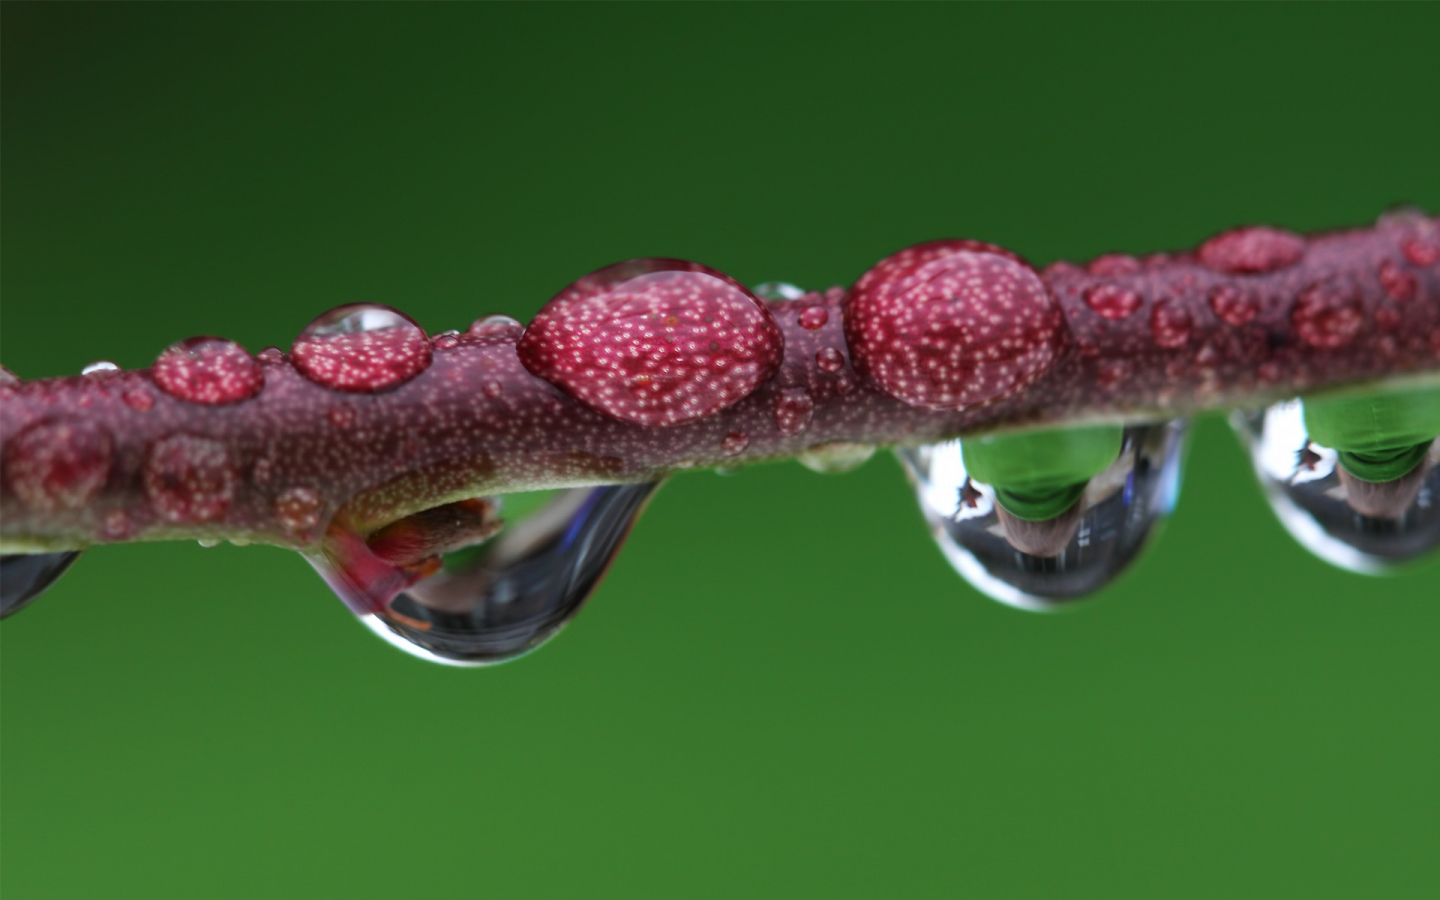 Droplet magnified branch for 1440 x 900 widescreen resolution